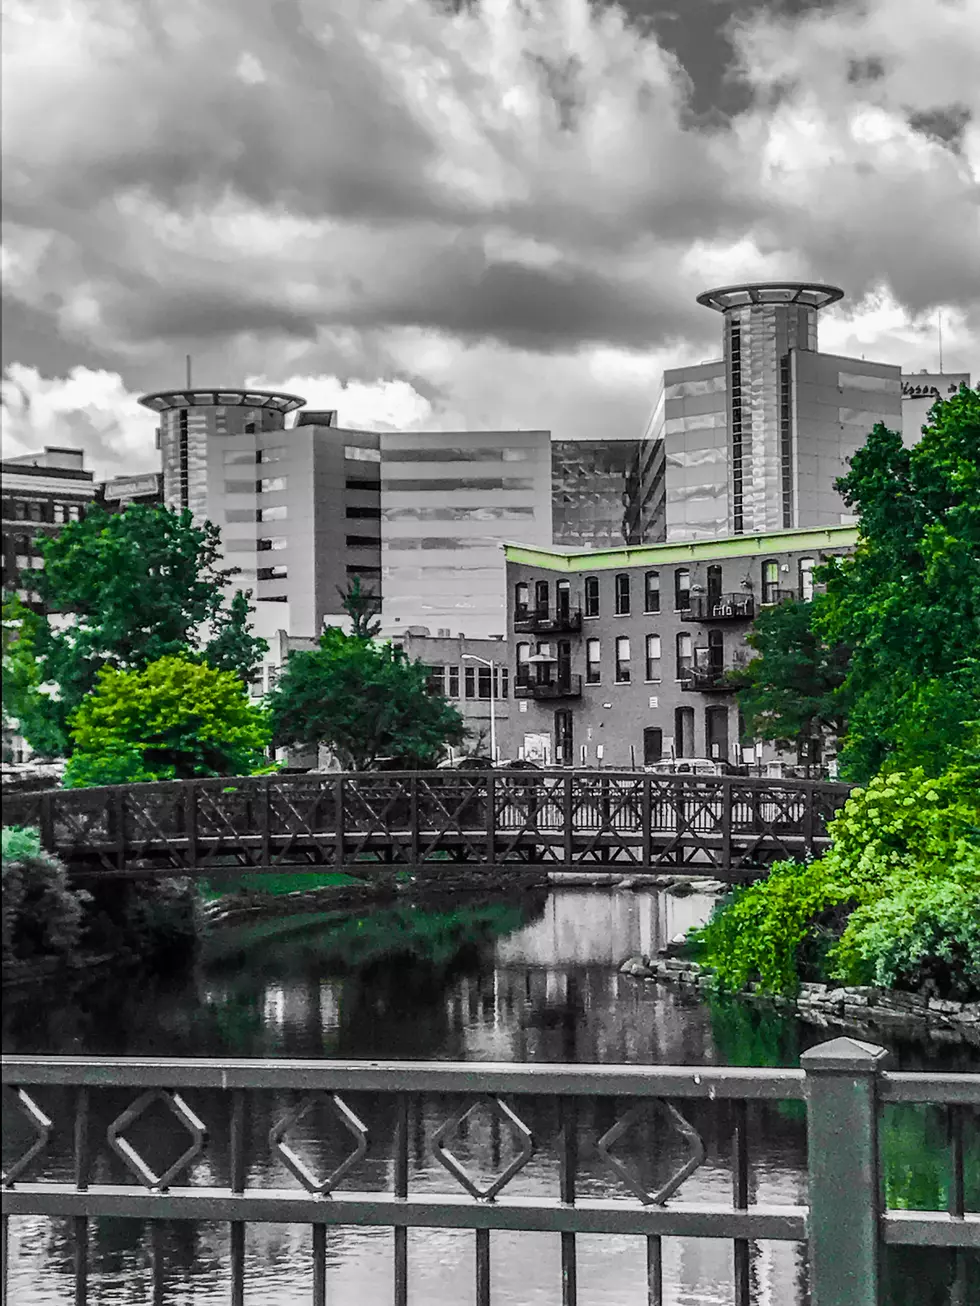 Kalamazoo Ranked #1 Most Affordable City To Live In The U.S.